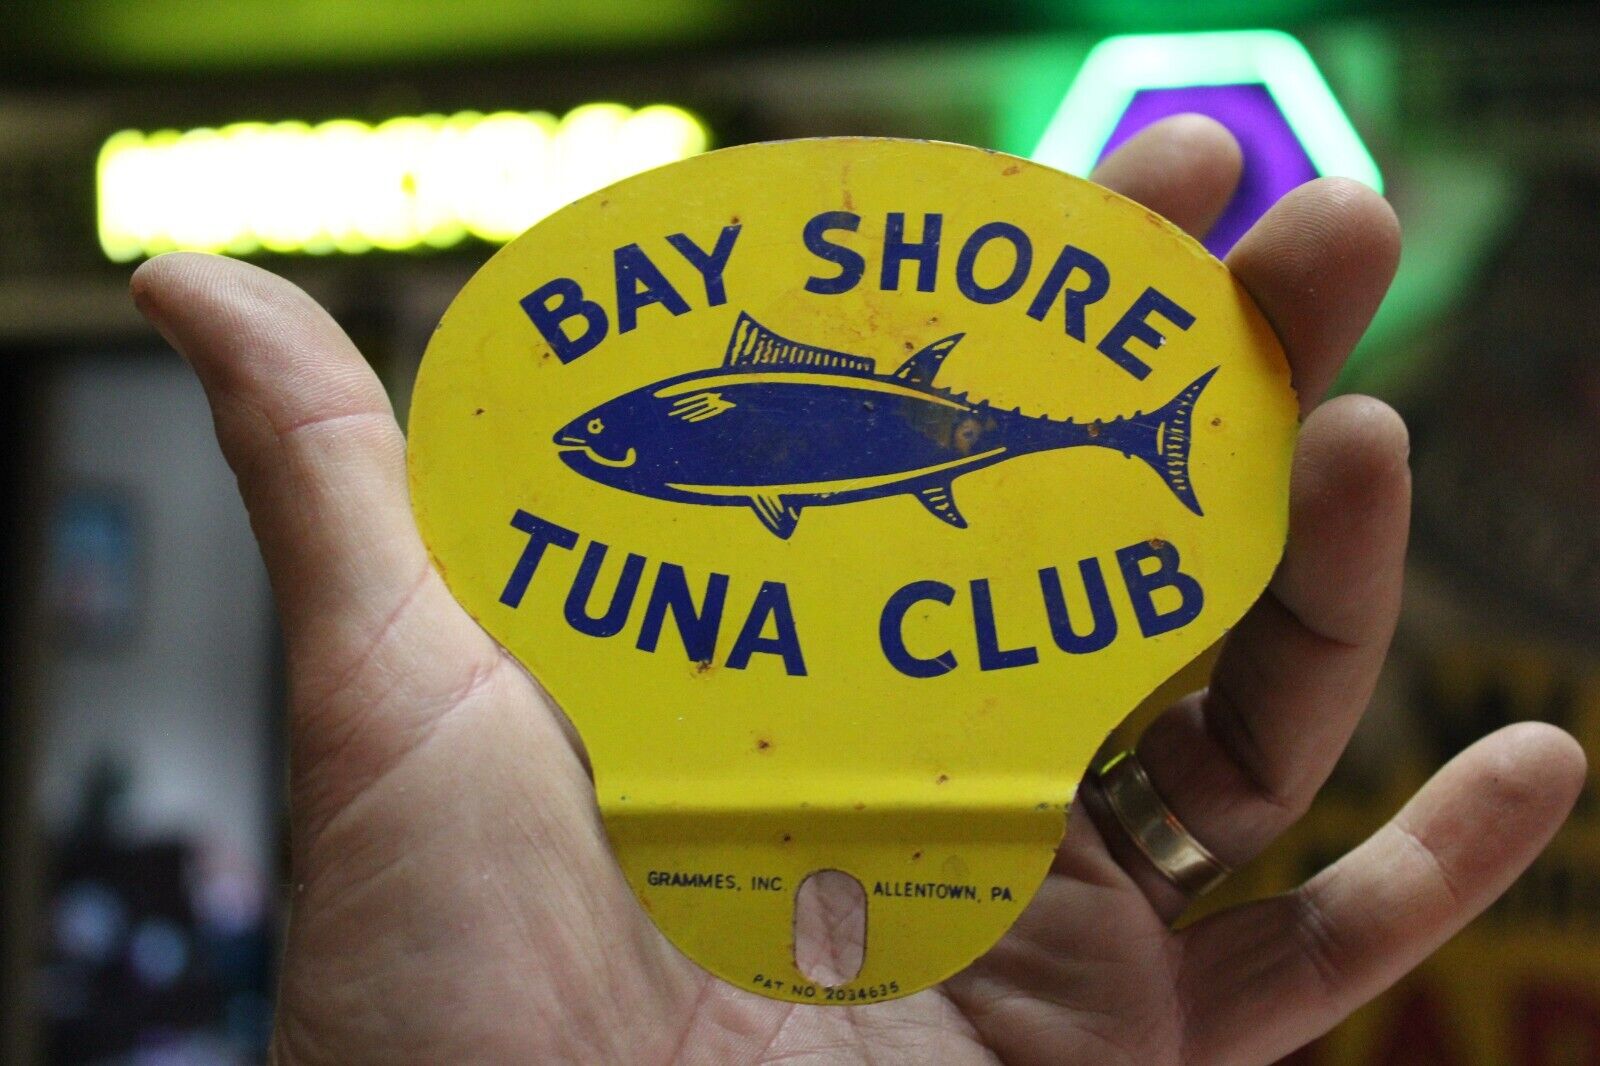 RARE 1950s BAY SHORE TUNA CLUB STAMPED PAINTED METAL TOPPER SIGN FISHING BAIT